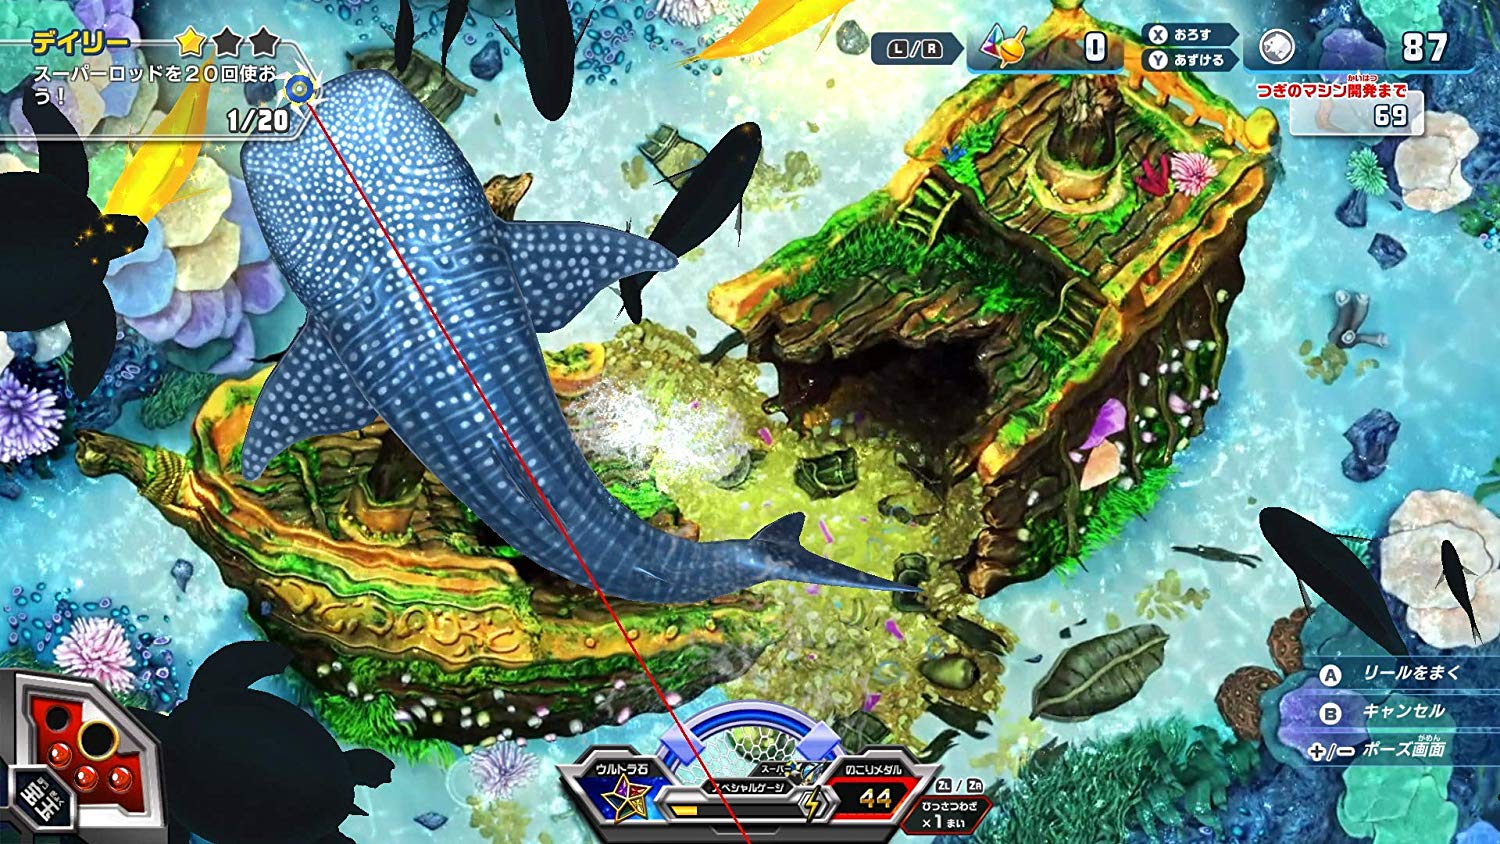 Fishing Spirits: Switch Version hard to find in Japan